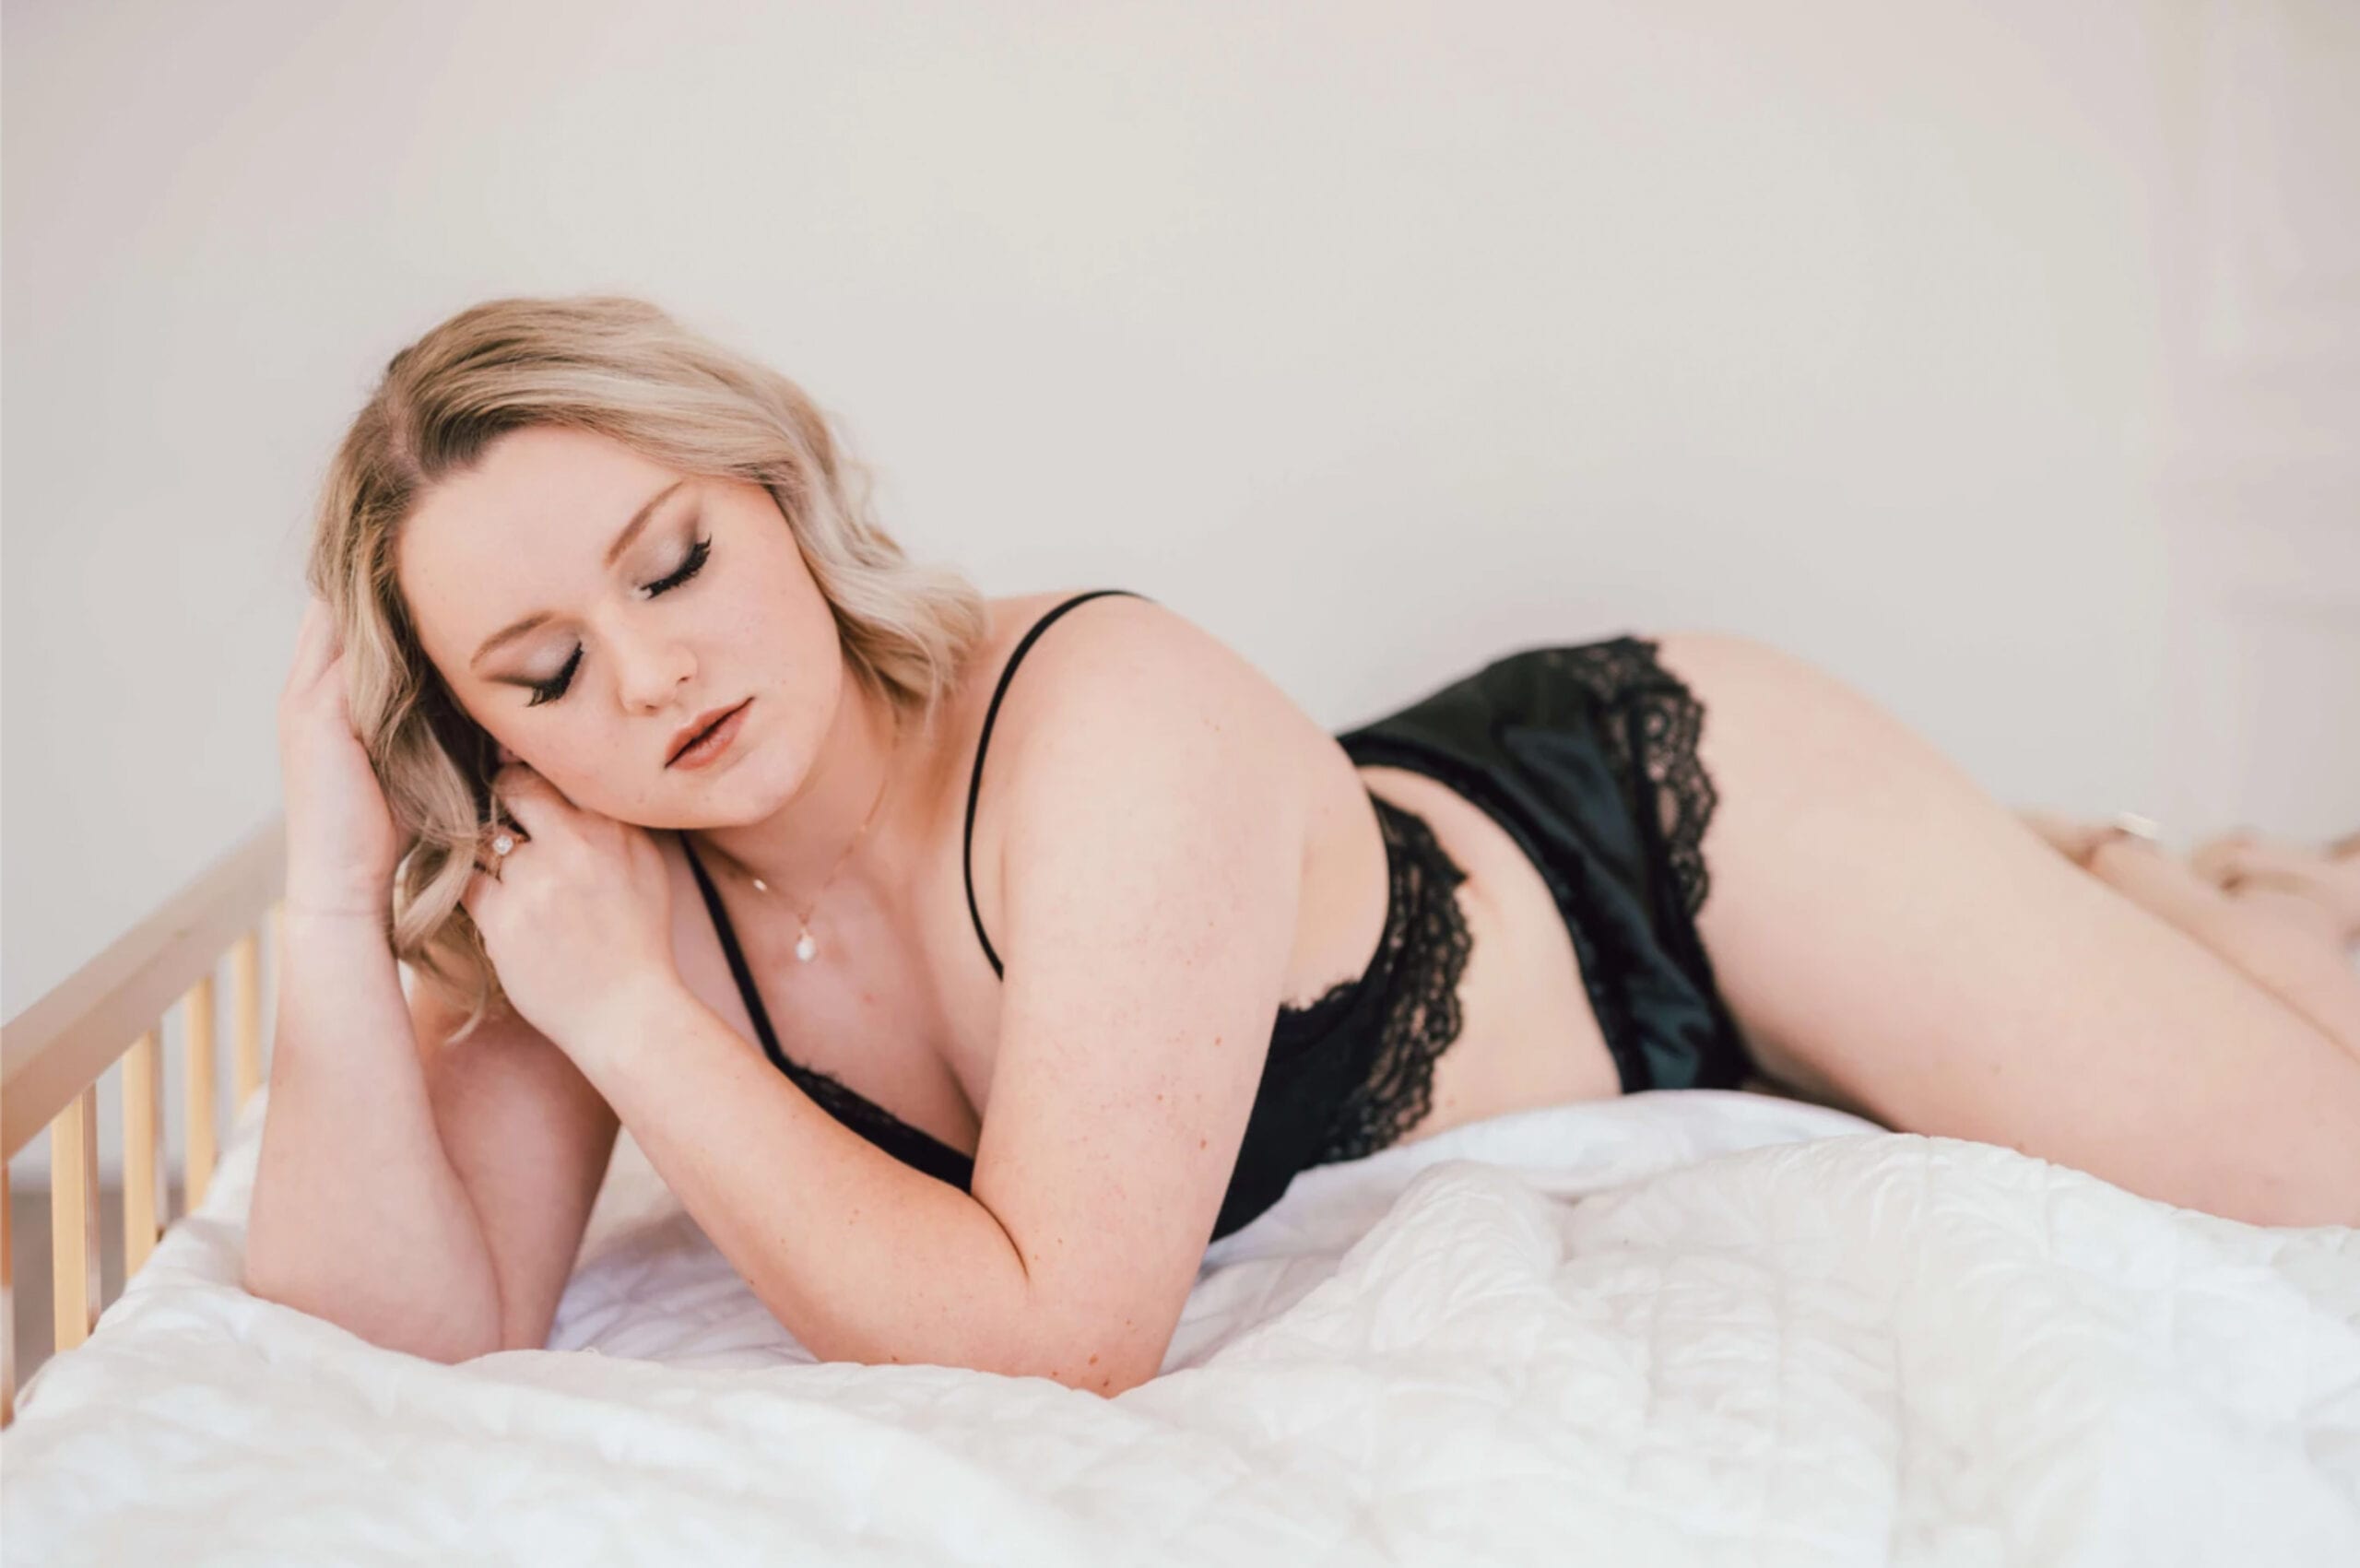 love brittny boudoir laying on bed